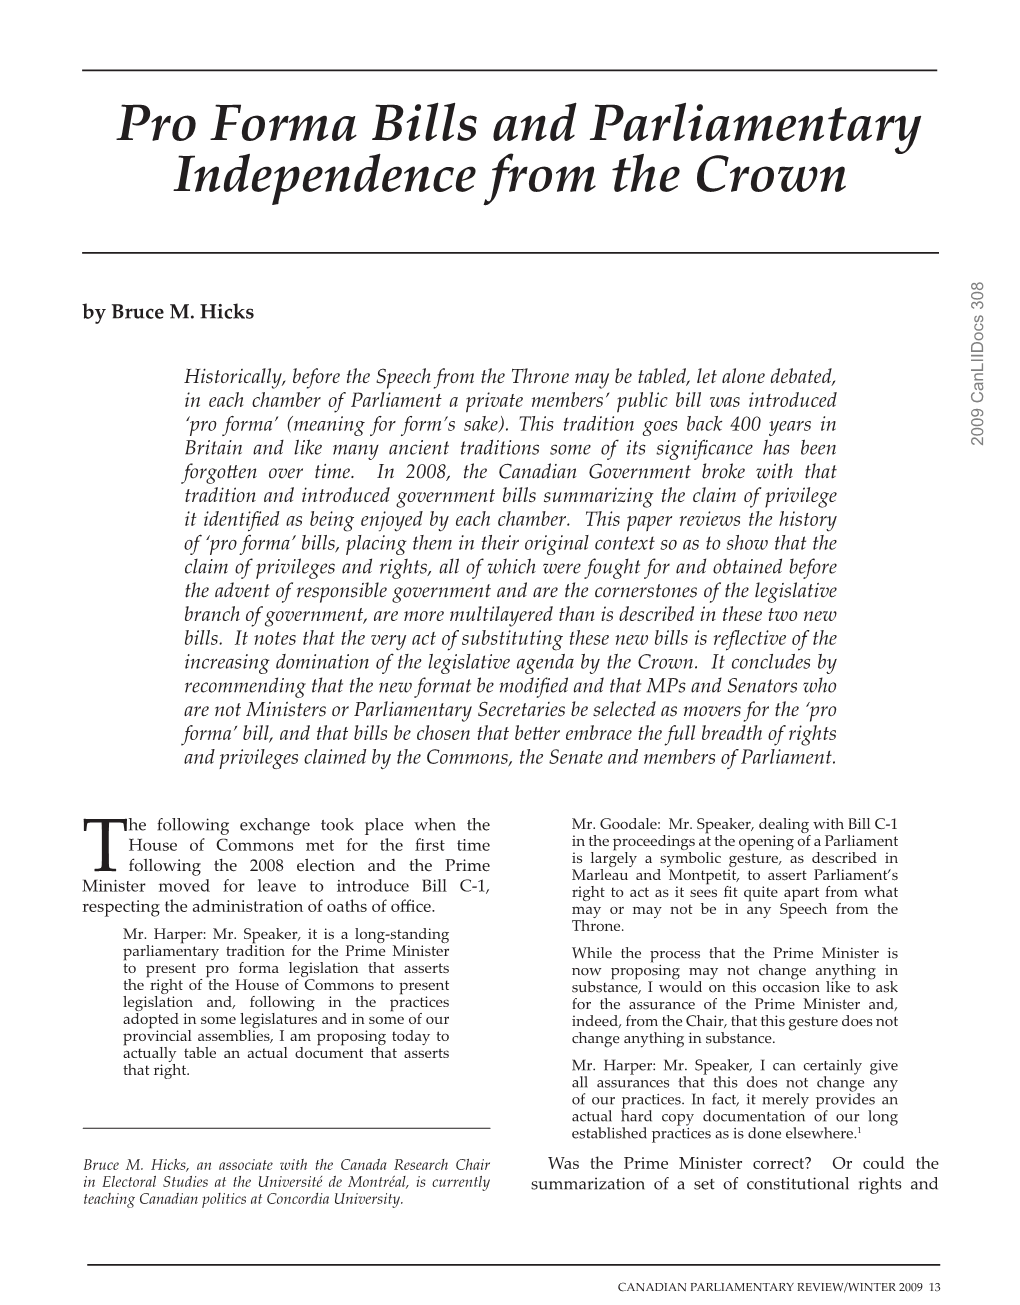 Pro Forma Bills and Parliamentary Independence from the Crown